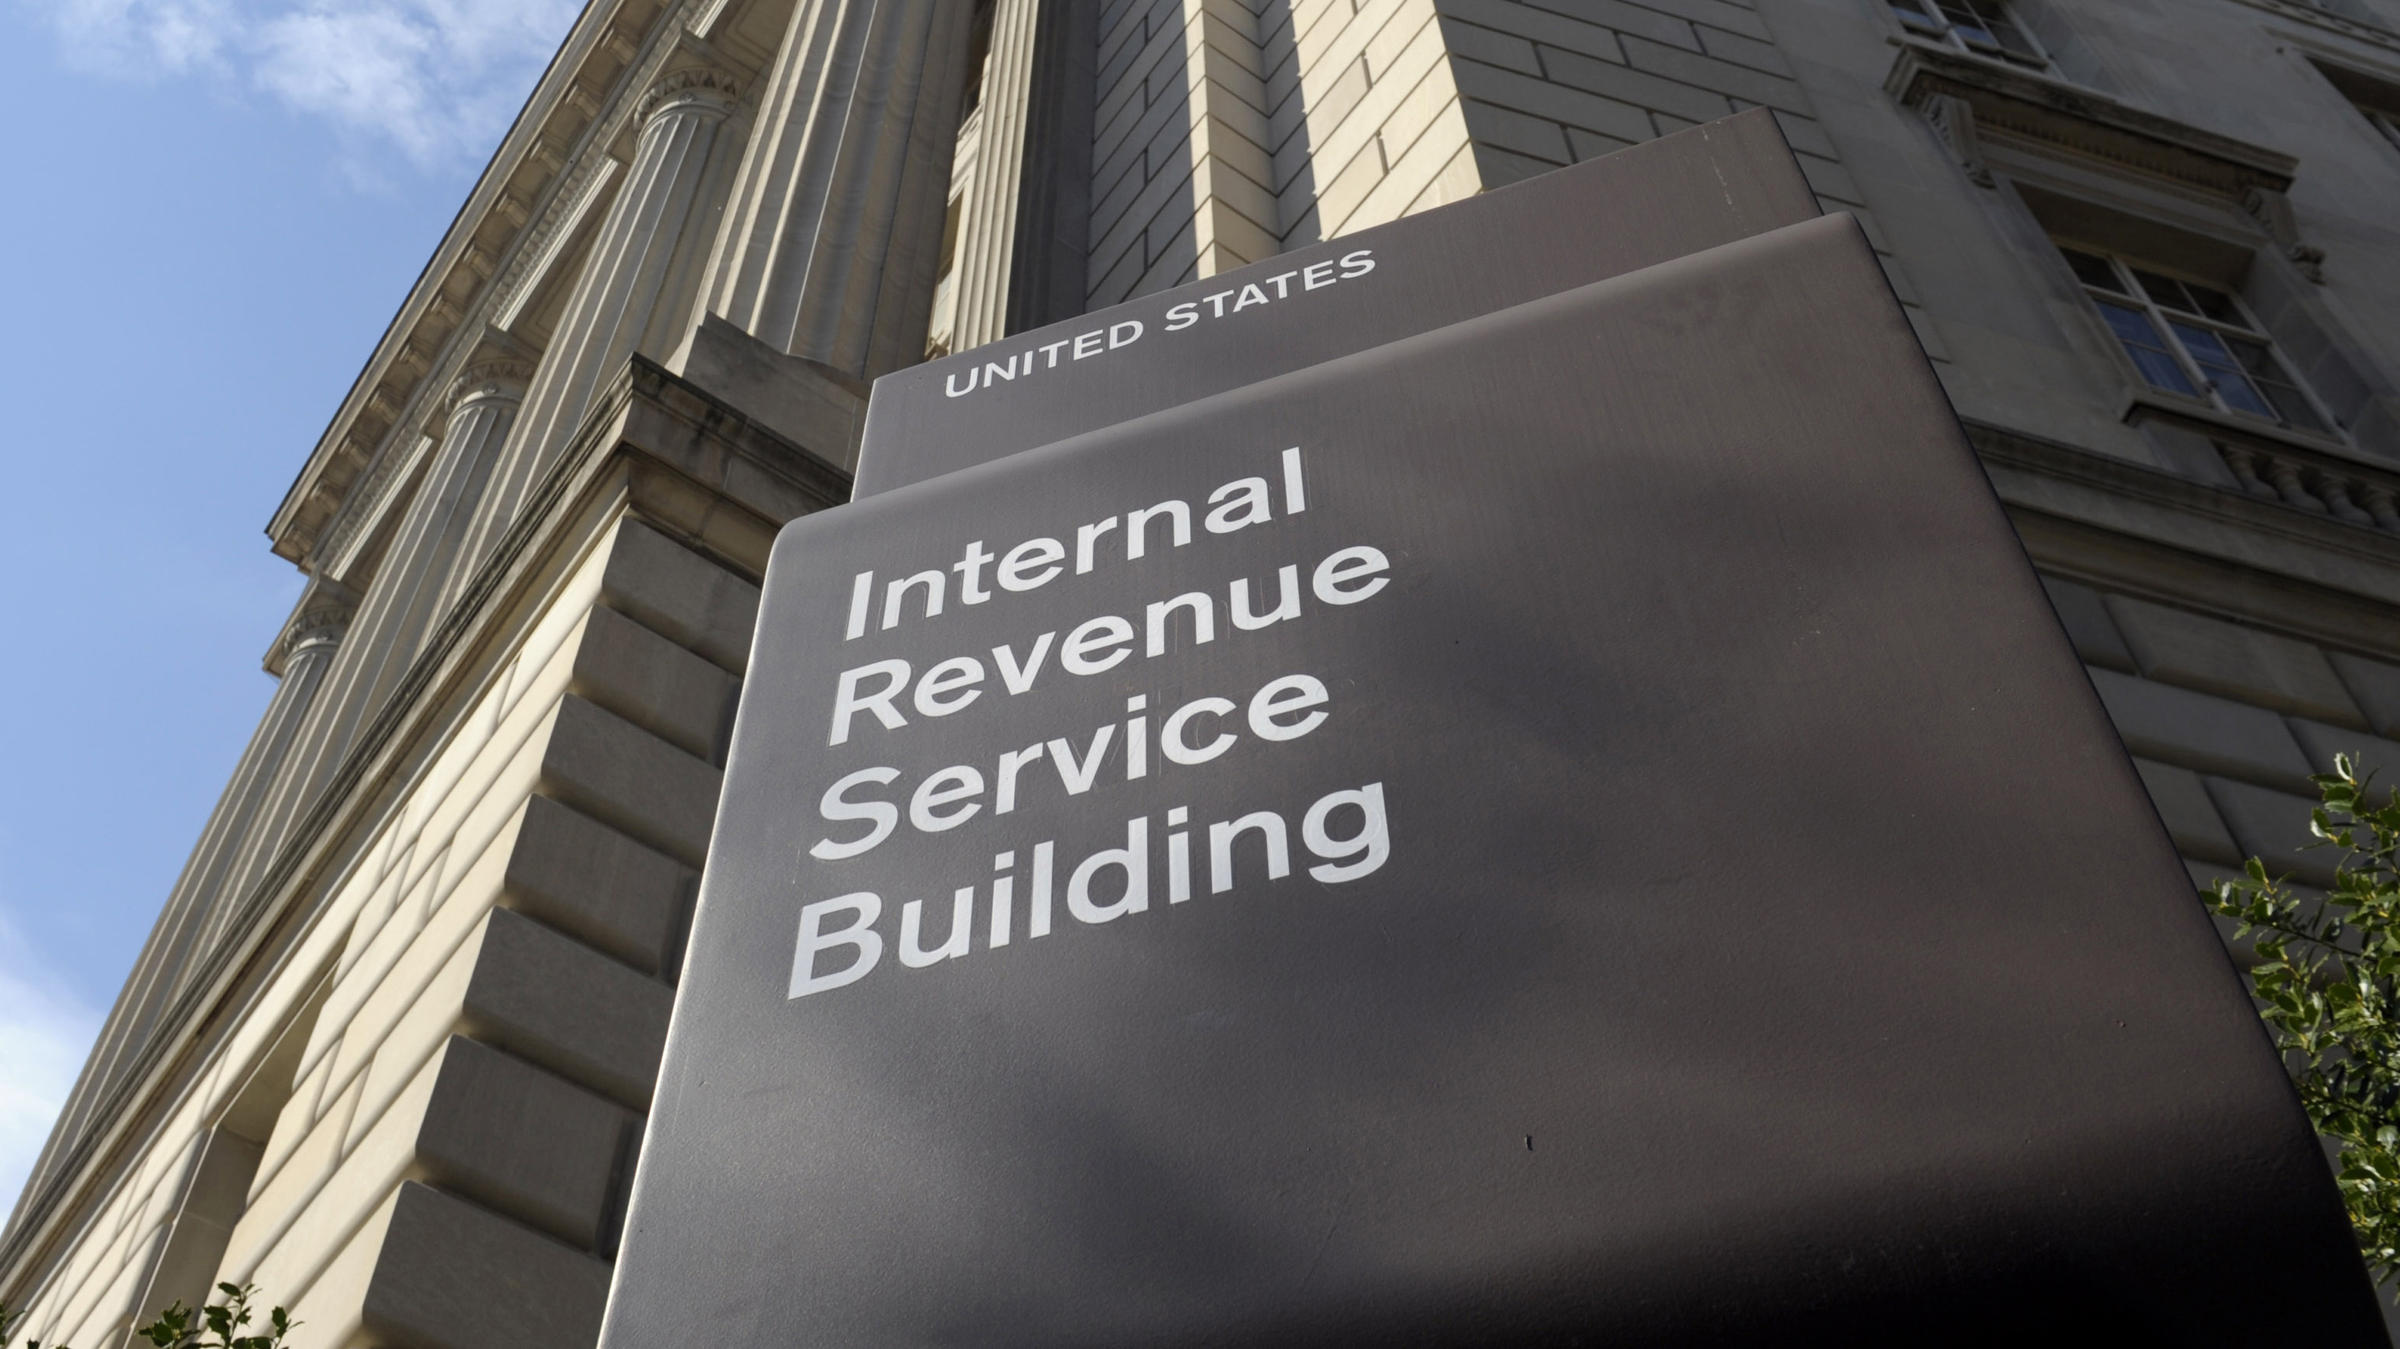 Want Relief Money Sooner? Give The IRS Your Bank Account Number